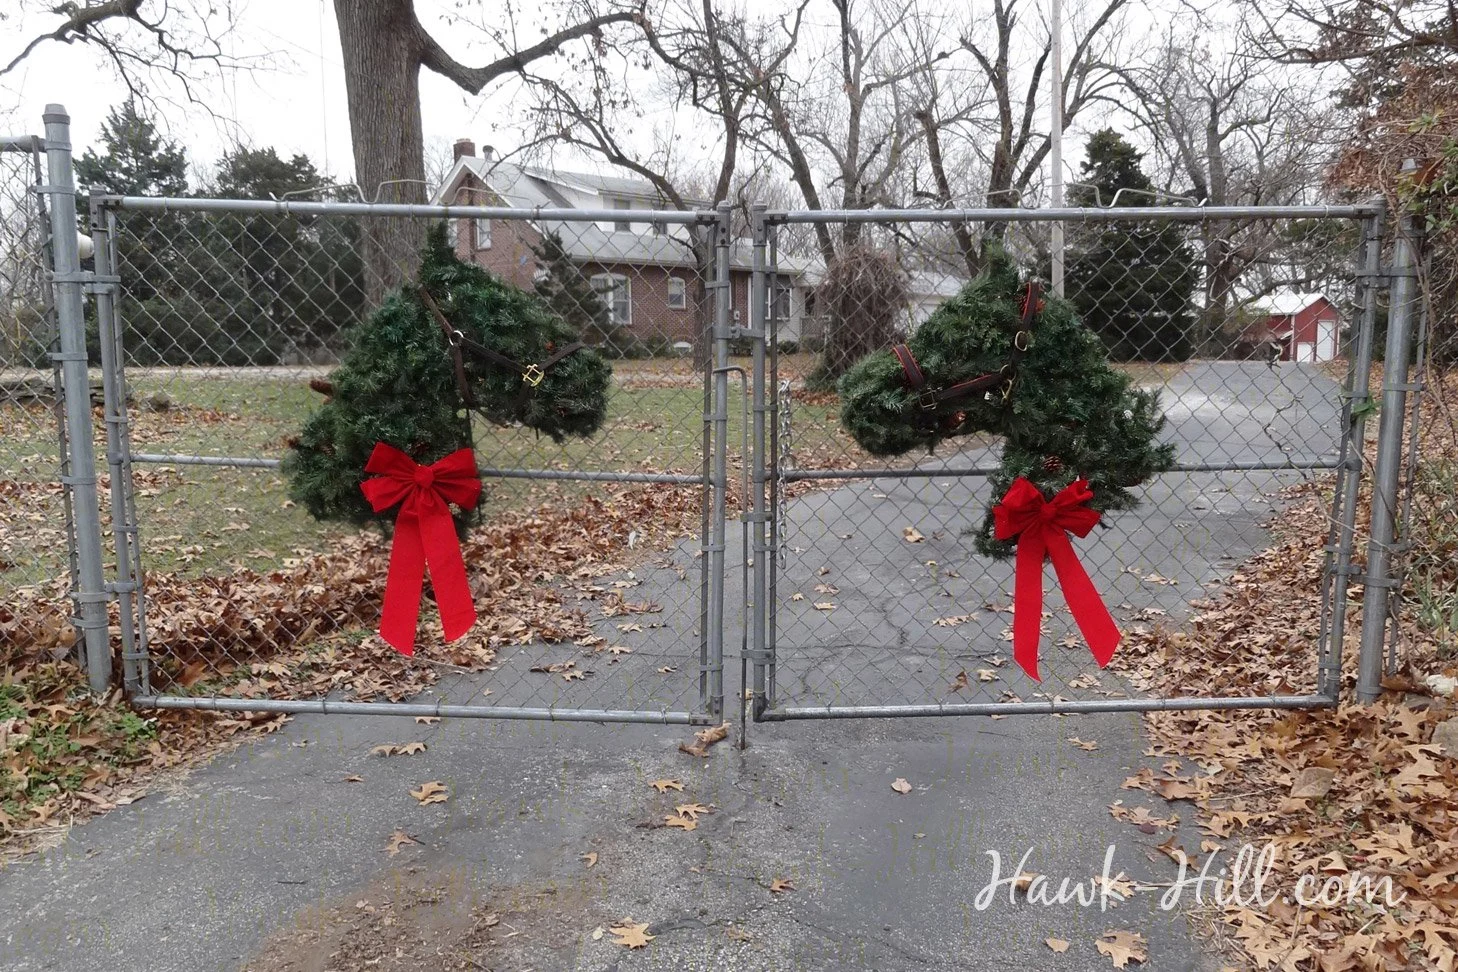 Estate Gates with Horse Christmas Wreaths